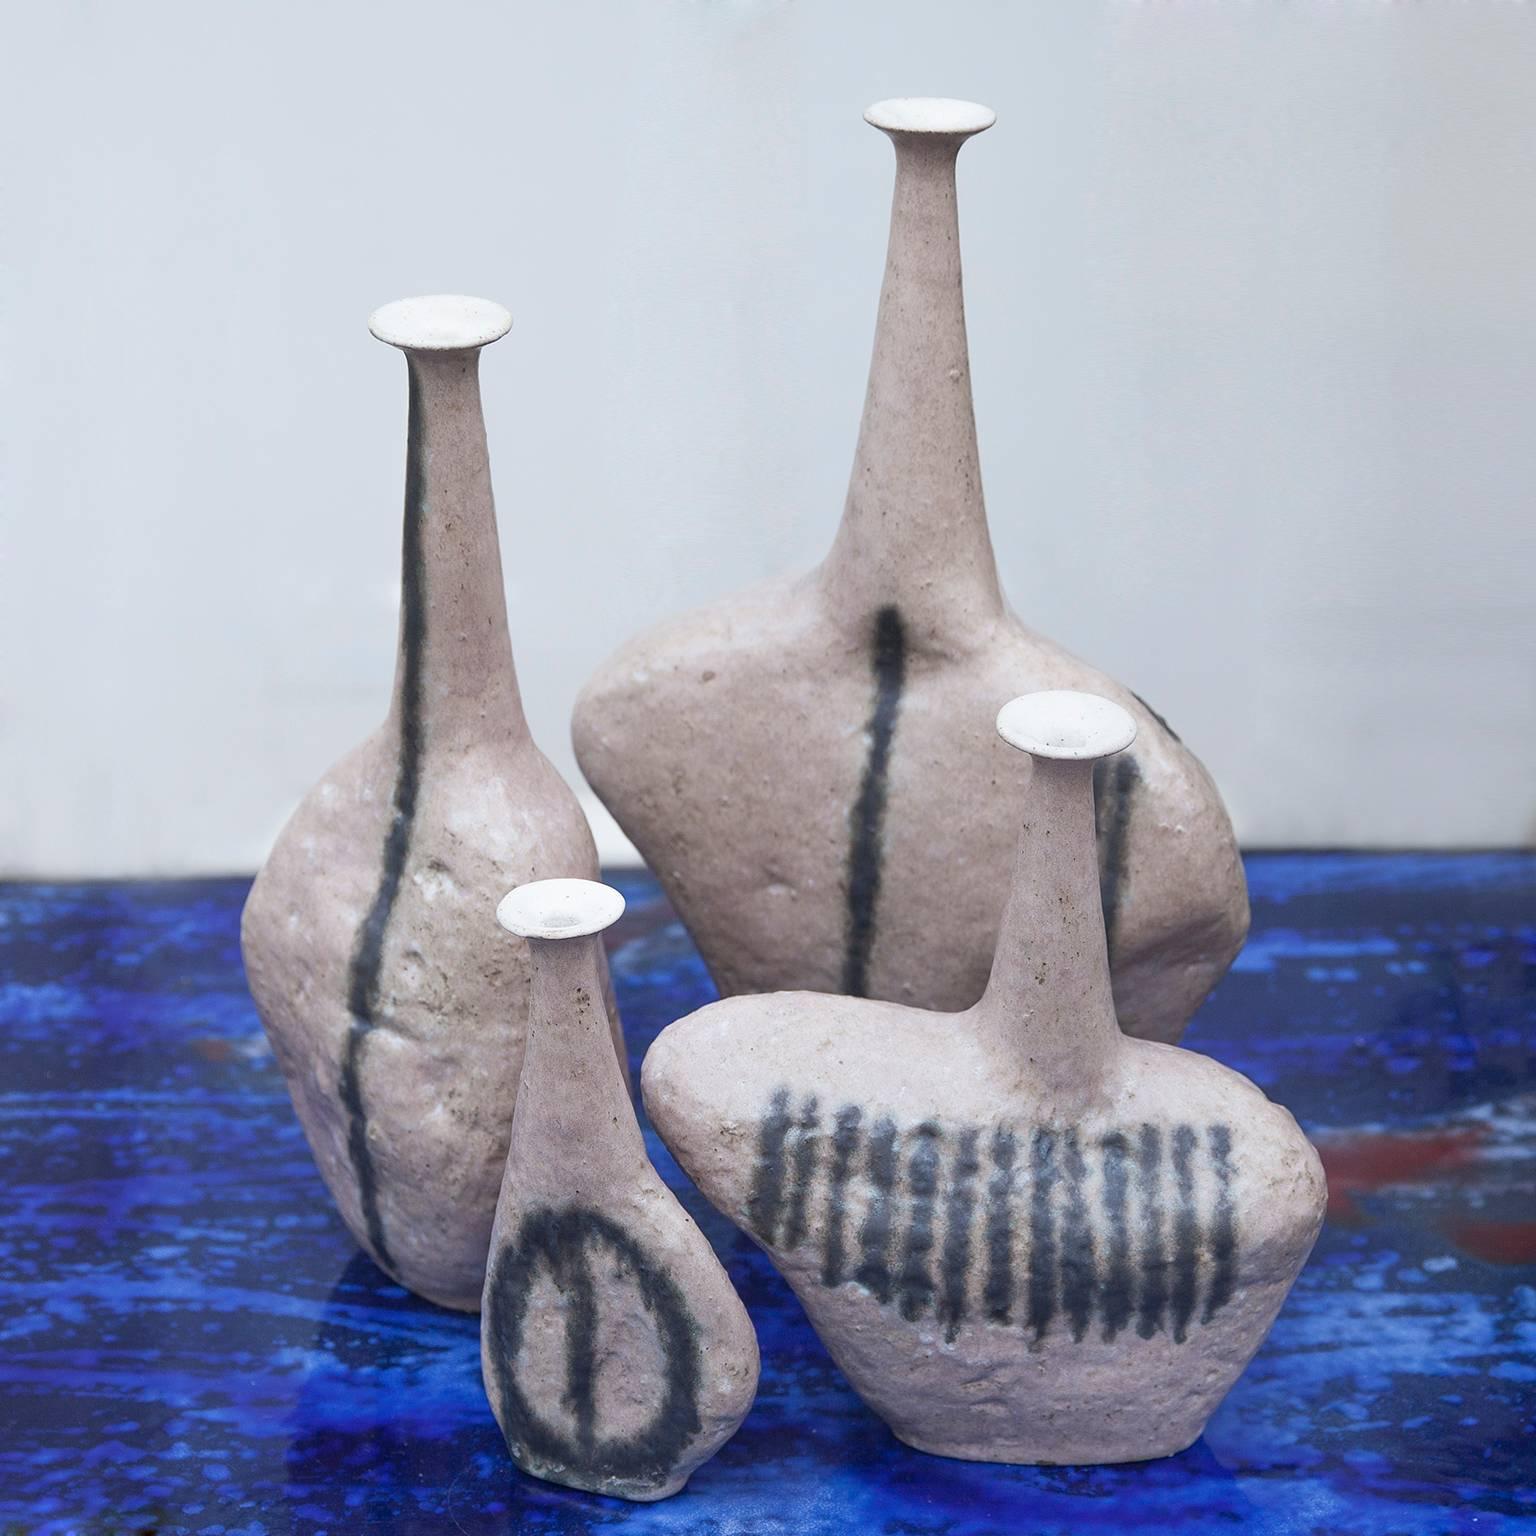 Very rare and huge set of four unique stoneware vases model Sassi by the famous Italian Artist Bruno Gambone in grès light rose glaze and fantastic forms, directly bought from the Artist, signed Bruno Gambone Italy.
The dimensions are H 50x W 33 x